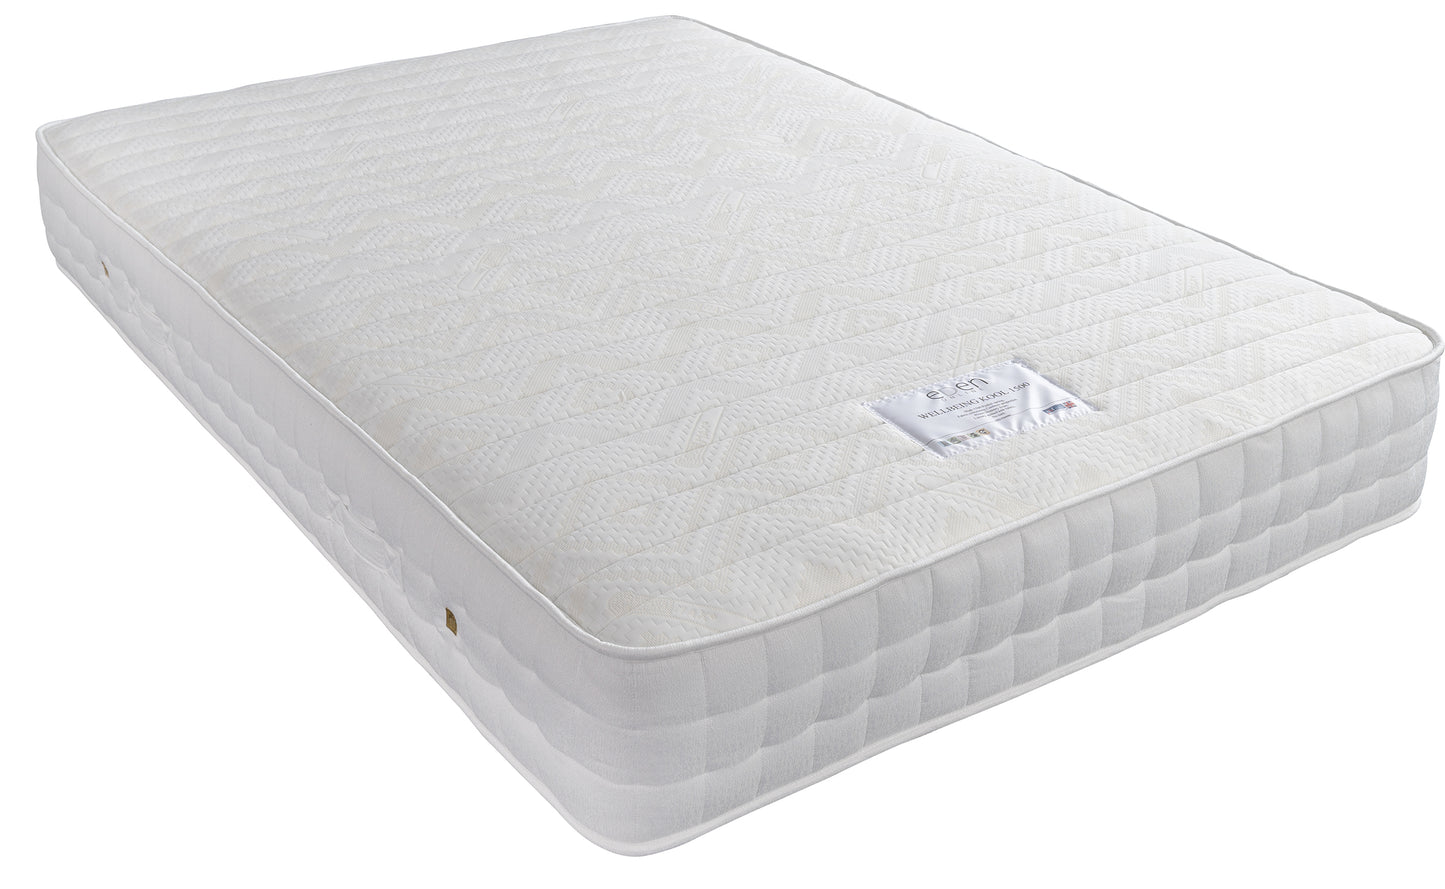 Sweet Dreams Kool Memory mattress. Fast delivery available.